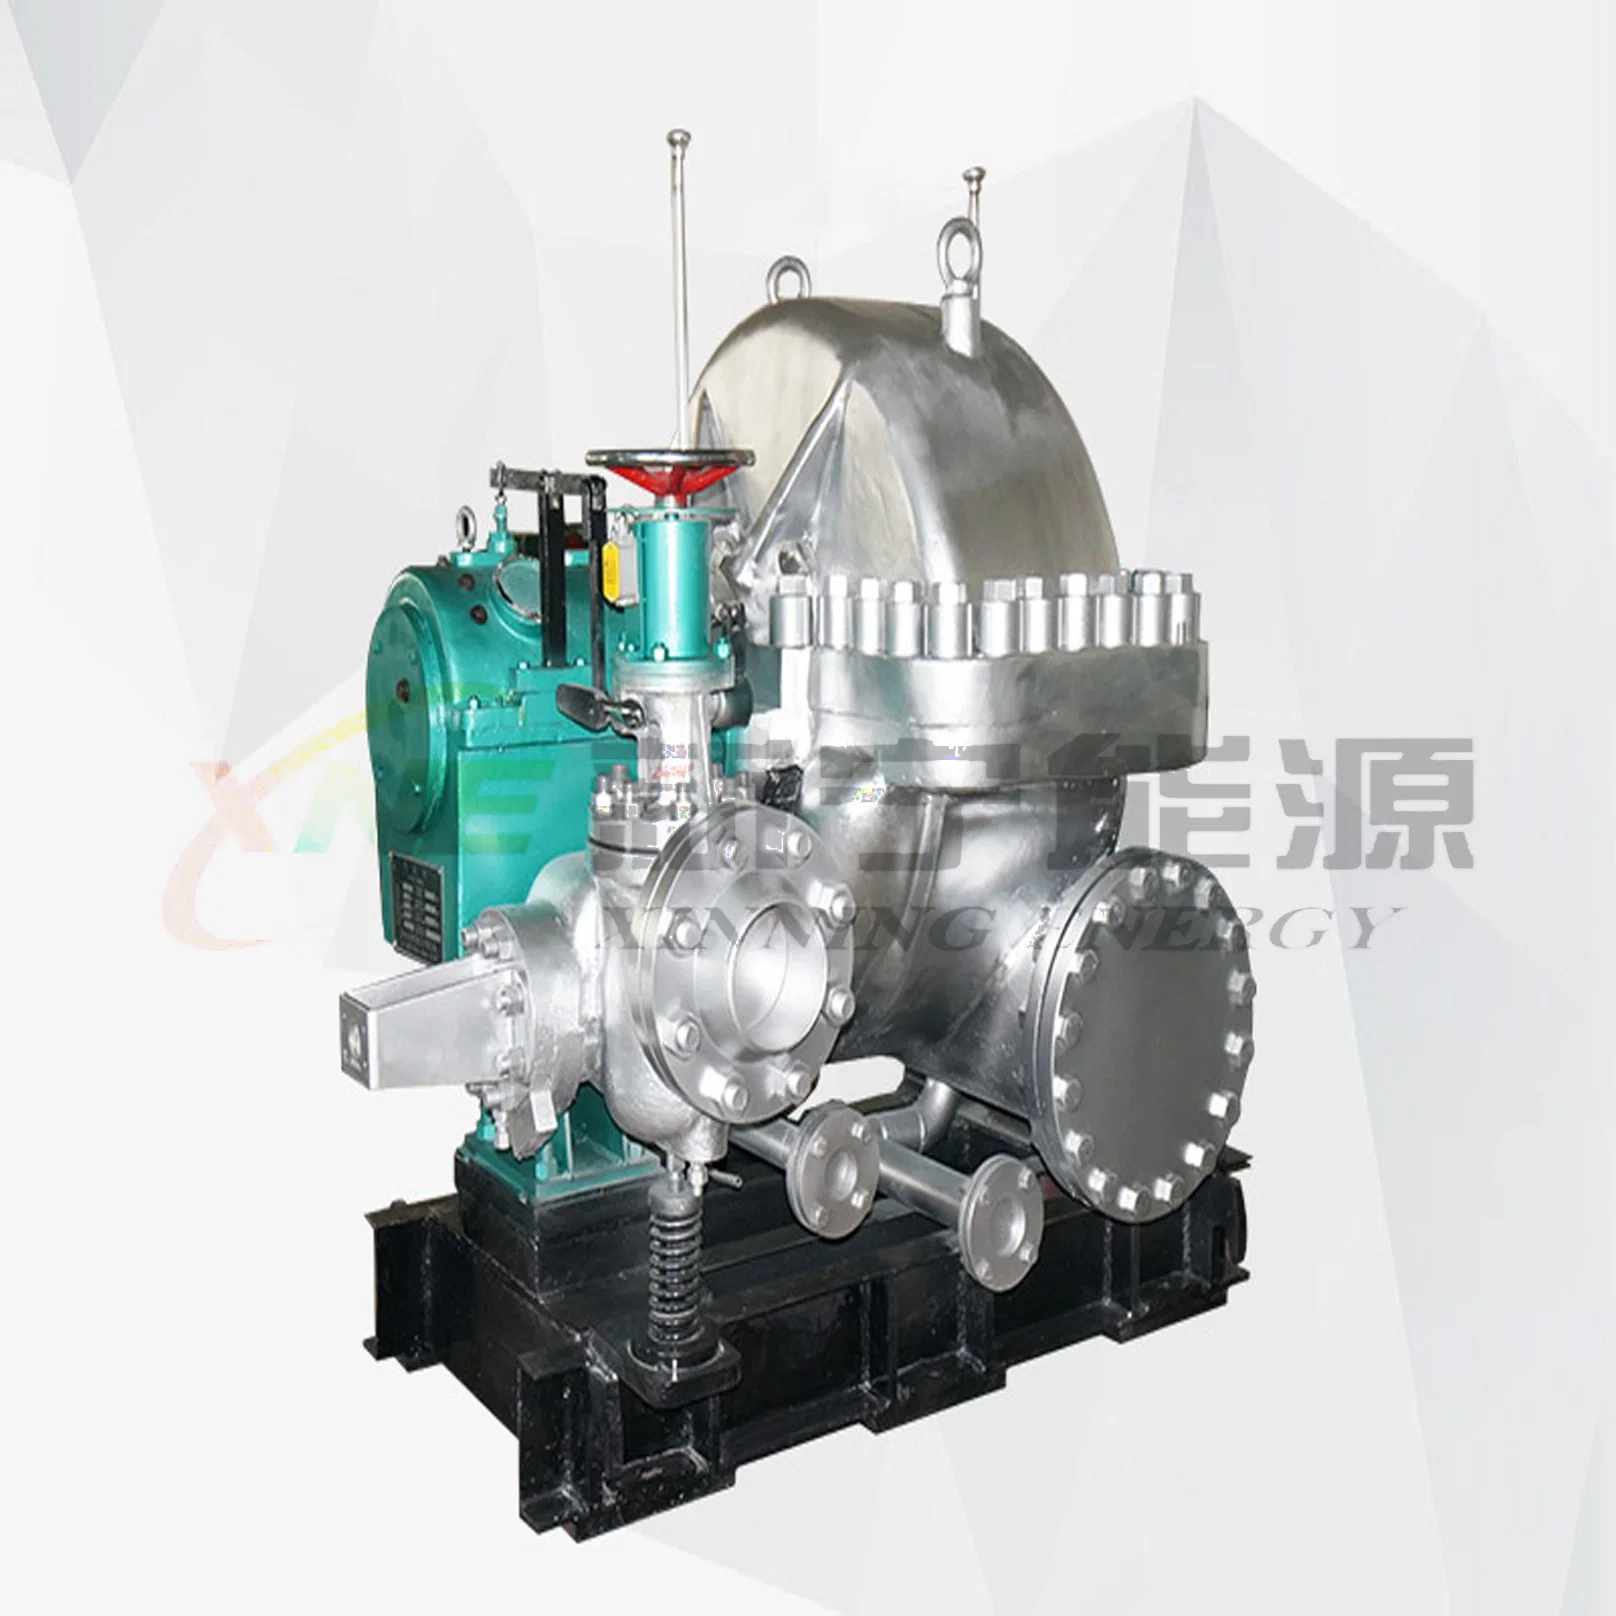 Hot Selling Back Pressure Steam Turbine for Power Plant 1000kw, 1600kw, 2000kw, 2500kw